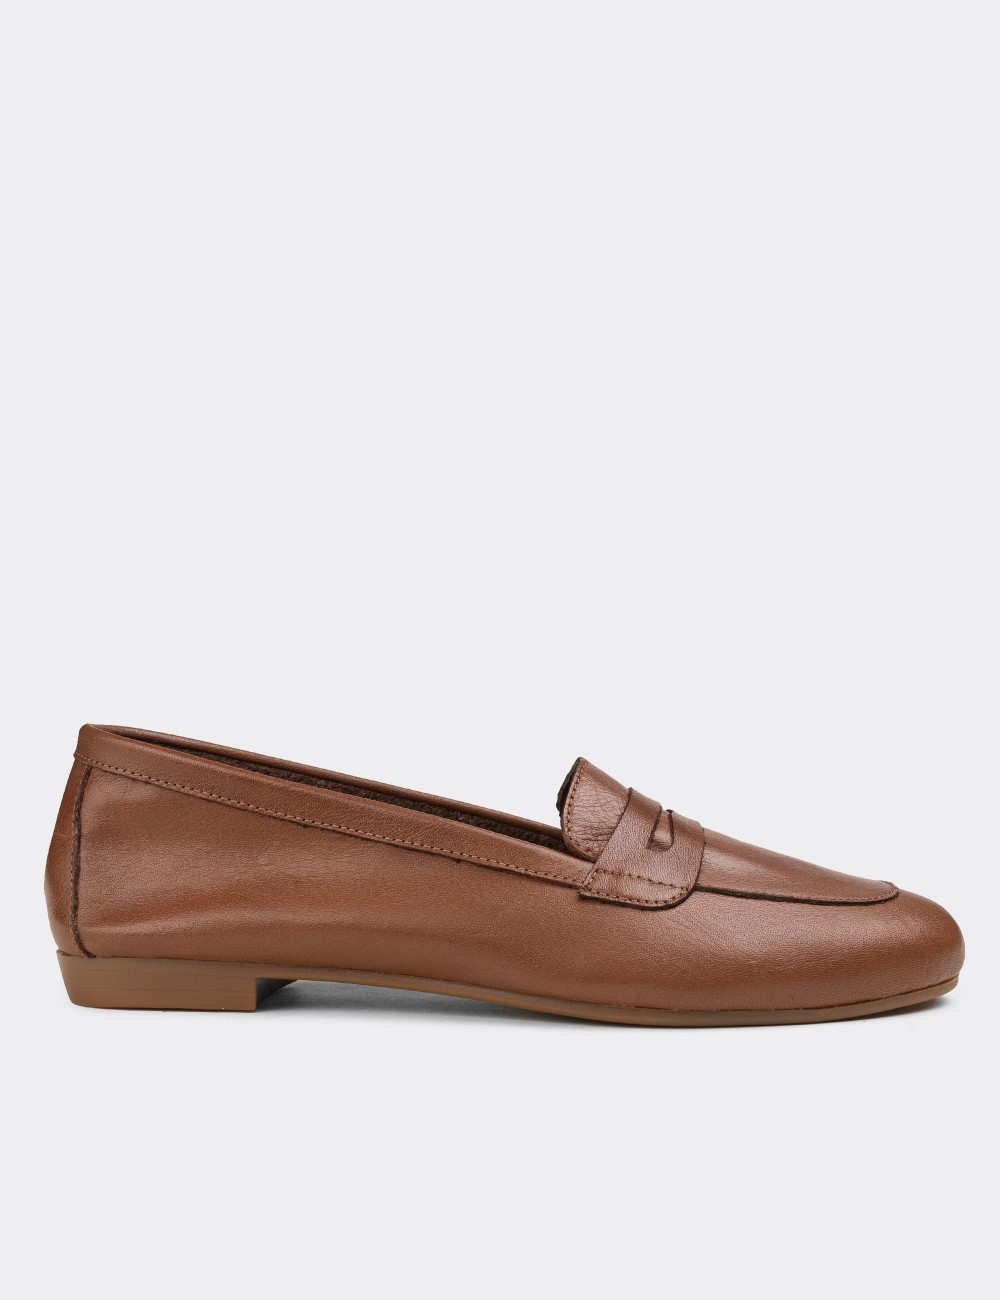 Tan  Leather Loafers Shoes - E3202ZTBAC04